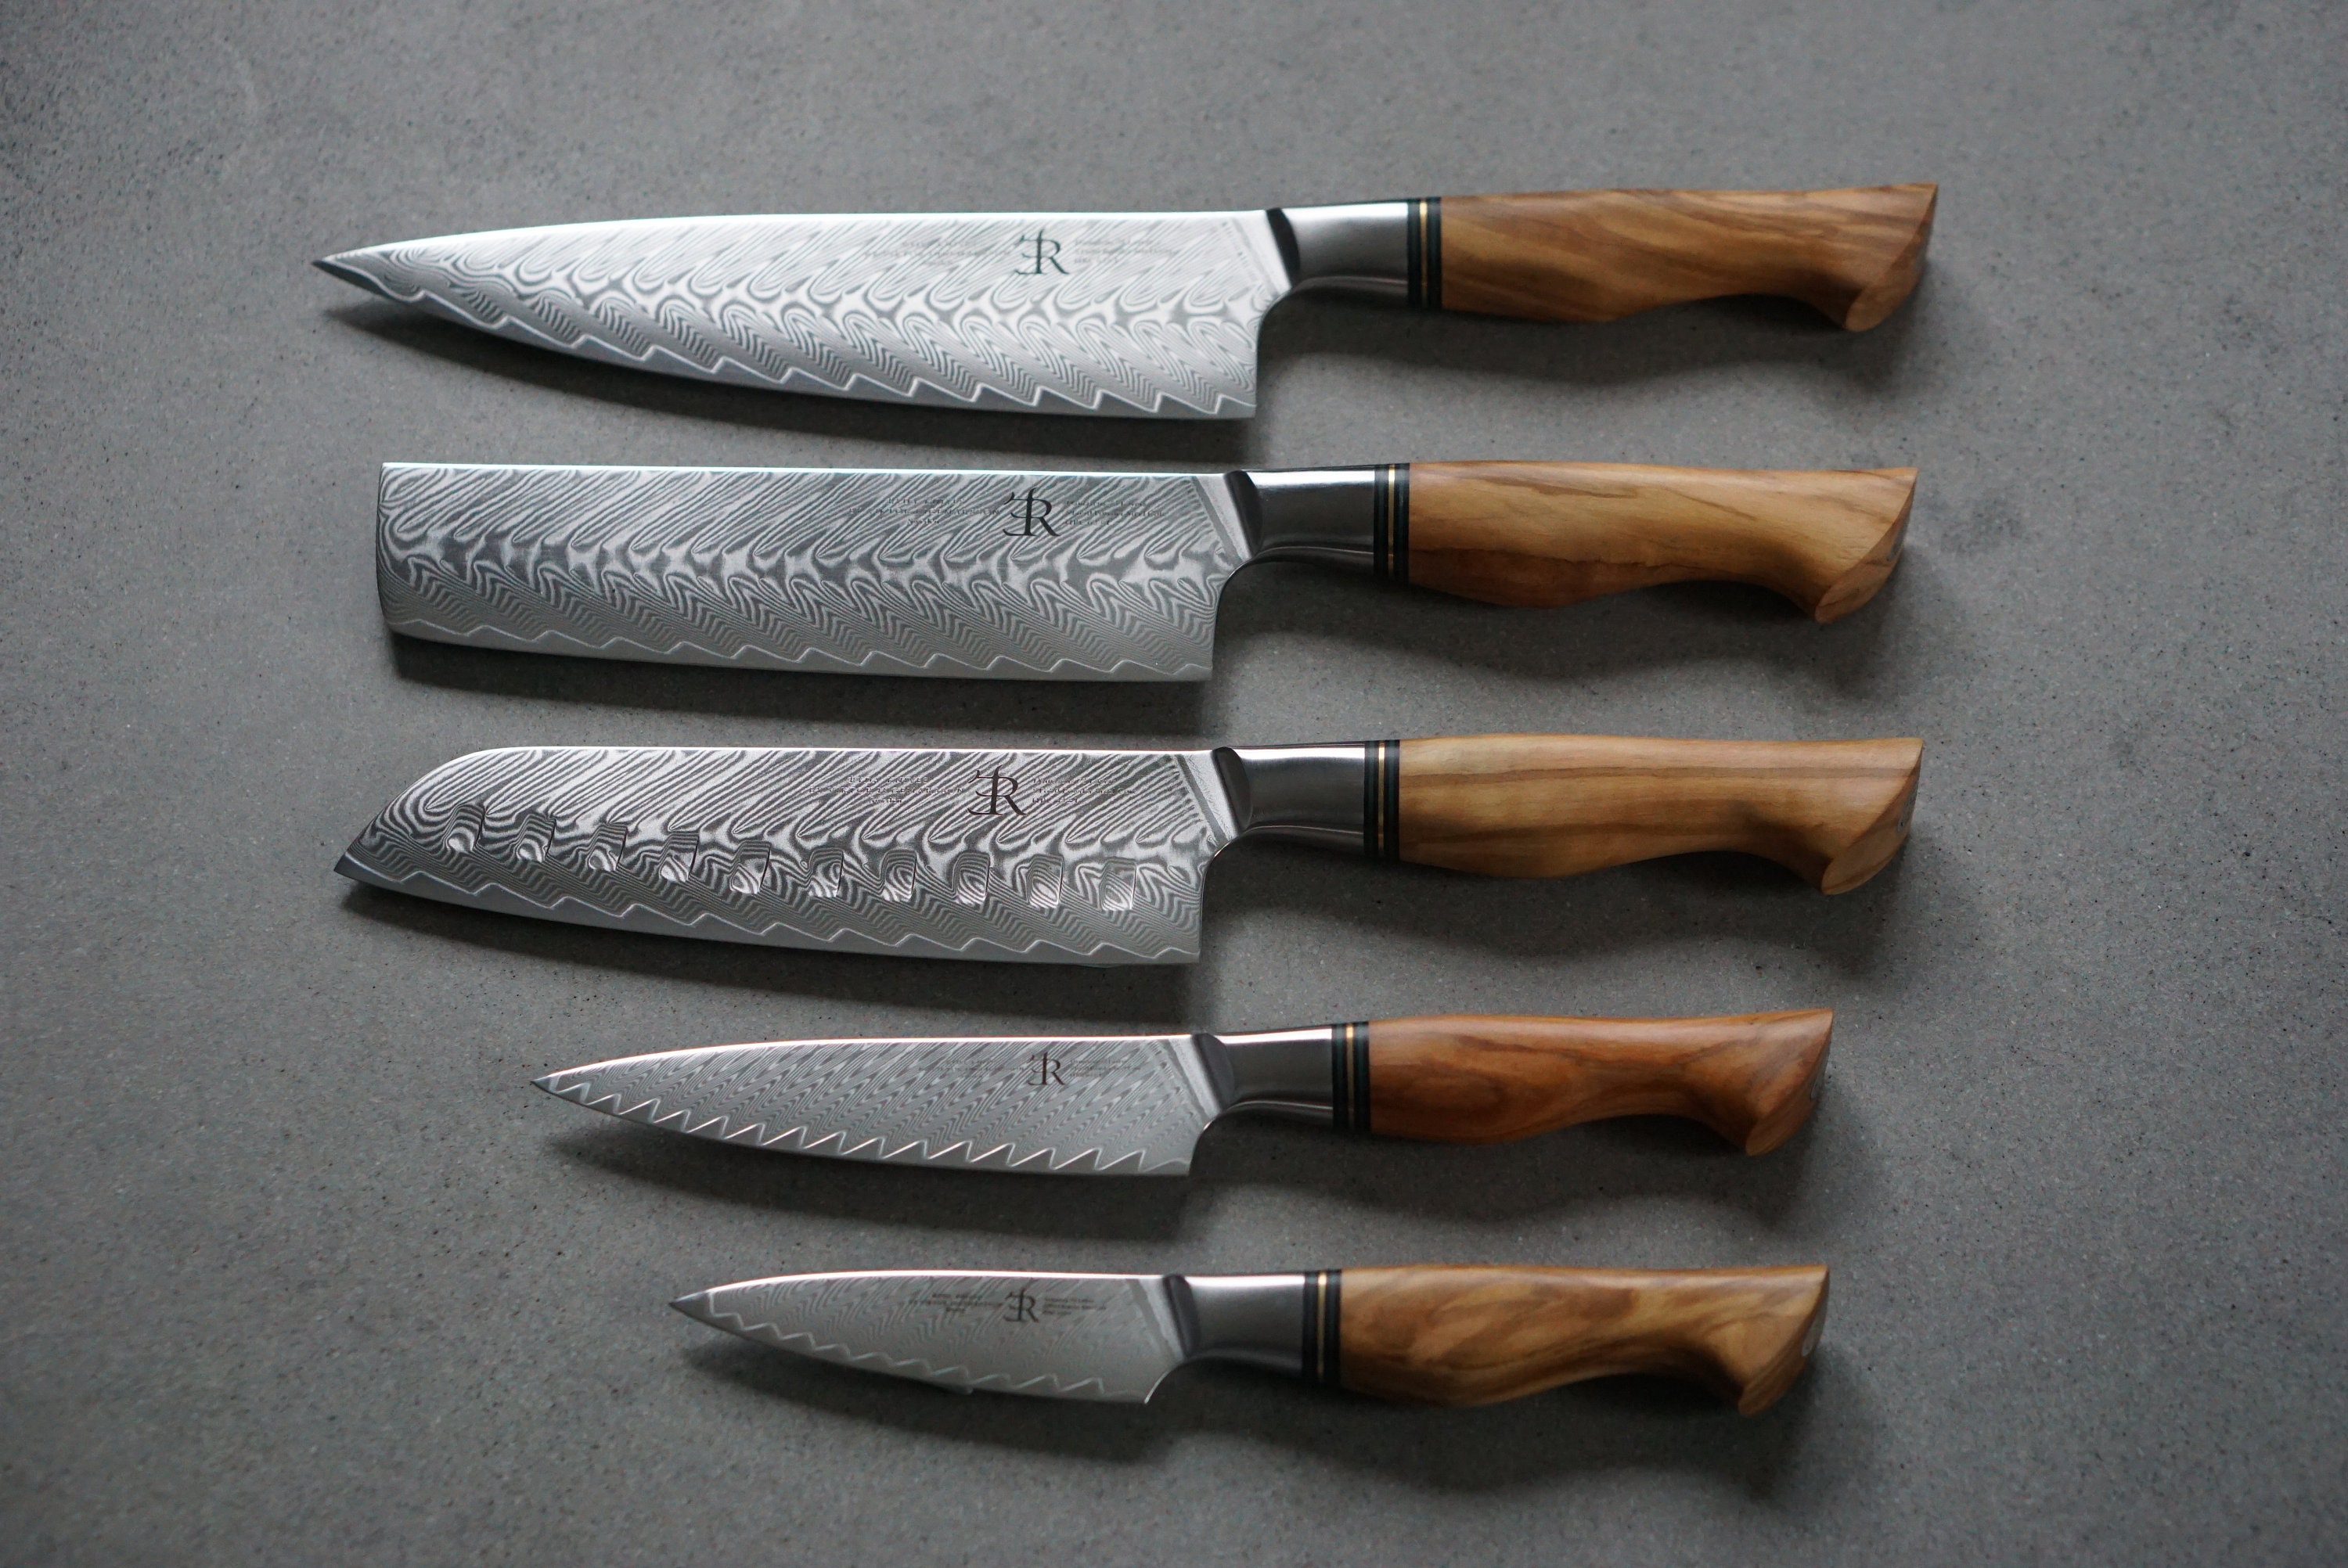 Mac Professional Knives, 3-Piece Set - Chef's Knife, Utility & Bread